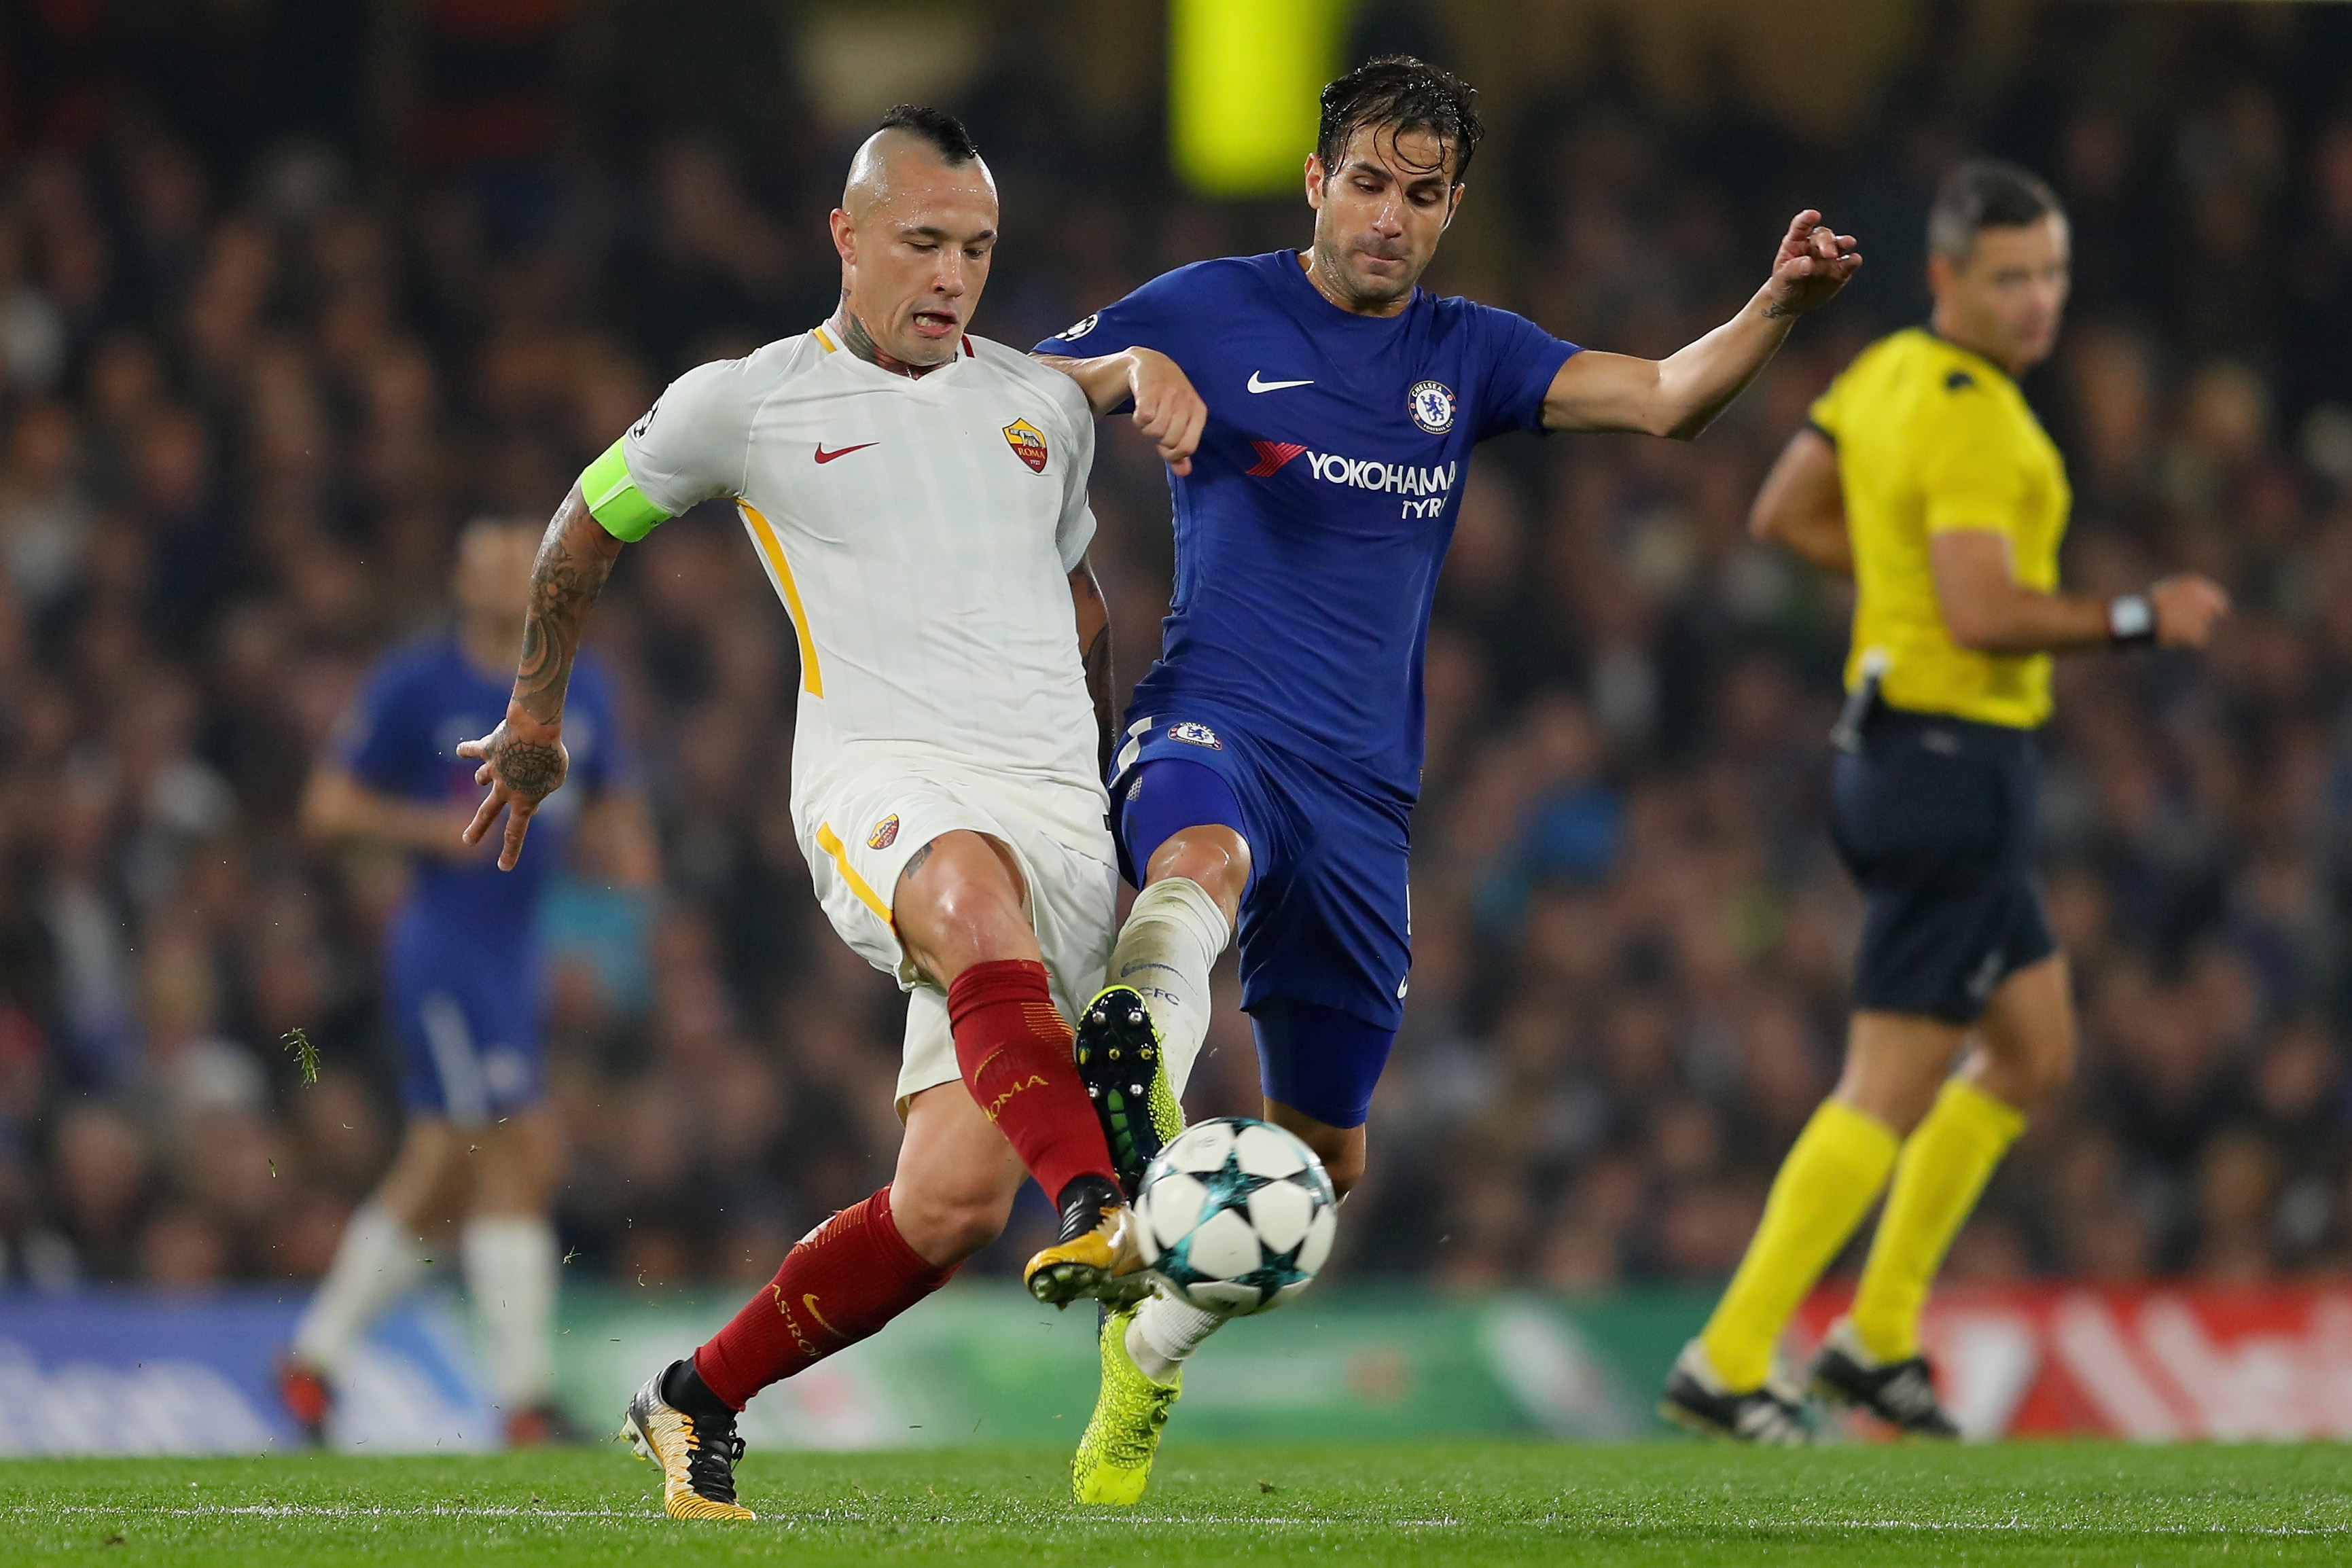 LONDON, ENGLAND - OCTOBER 18: Radja Nainggolan of AS Roma and Cesc Fabregas of Chelsea battle for possession during the UEFA Champions League group C match between Chelsea FC and AS Roma at Stamford Bridge on October 18, 2017 in London, United Kingdom.  (Photo by Richard Heathcote/Getty Images)